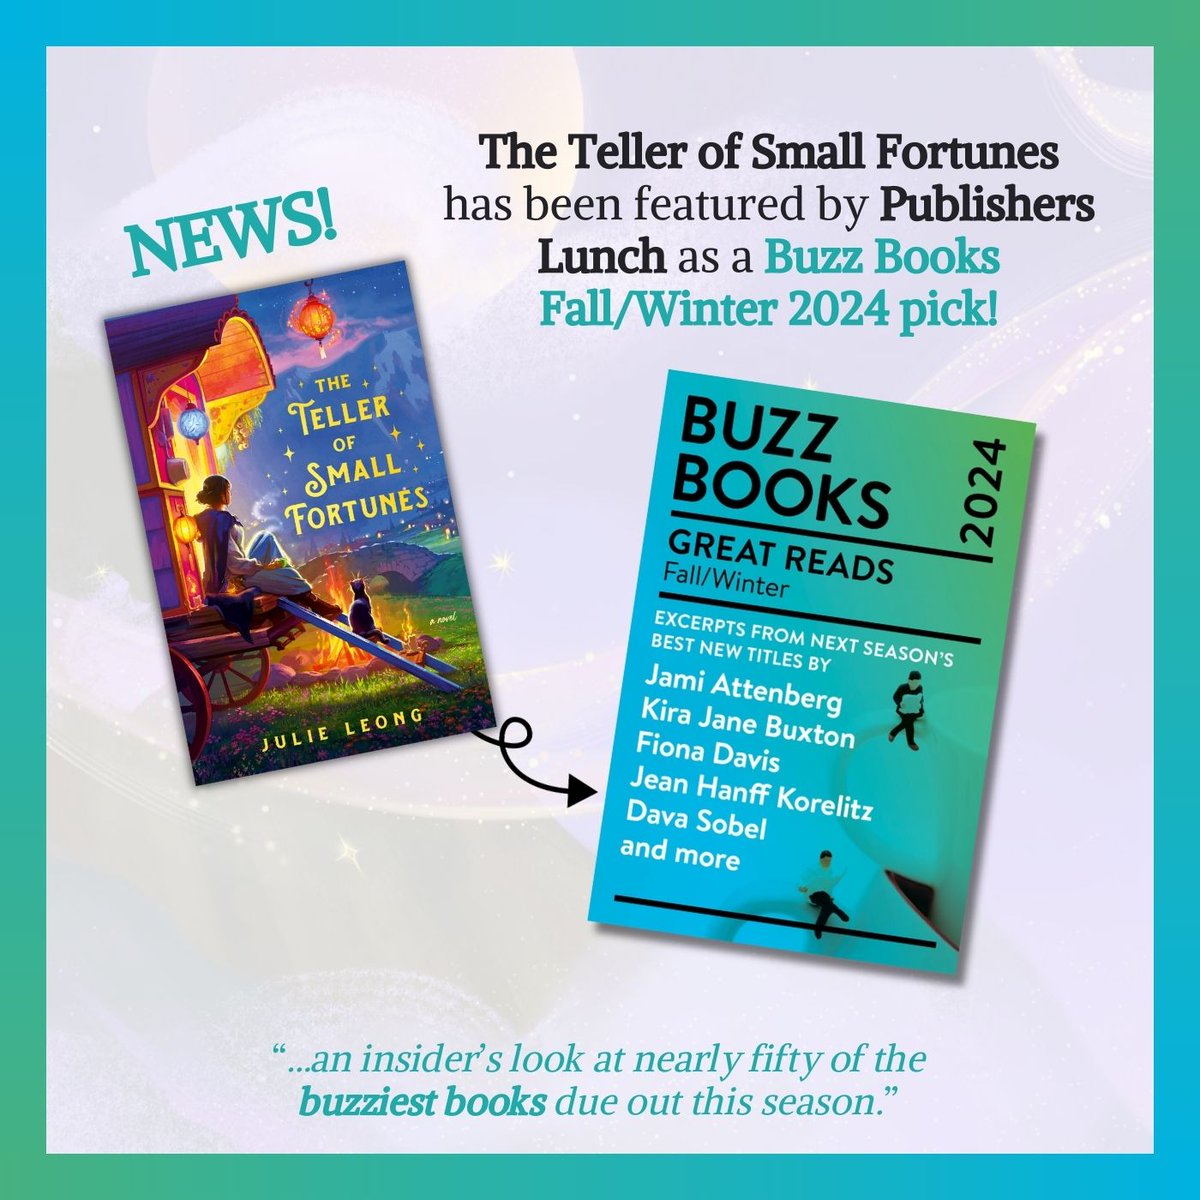 Big thanks to Publishers Lunch for selecting The Teller of Small Fortunes as one of the 'buzziest' debuts this season! 🐝 Read the first chapter for free in their sampler: bit.ly/3WEg26E

ARCs requestable on NetGalley/Edelweiss!

@AceBooksPub @BerkleyPub @2024Debuts